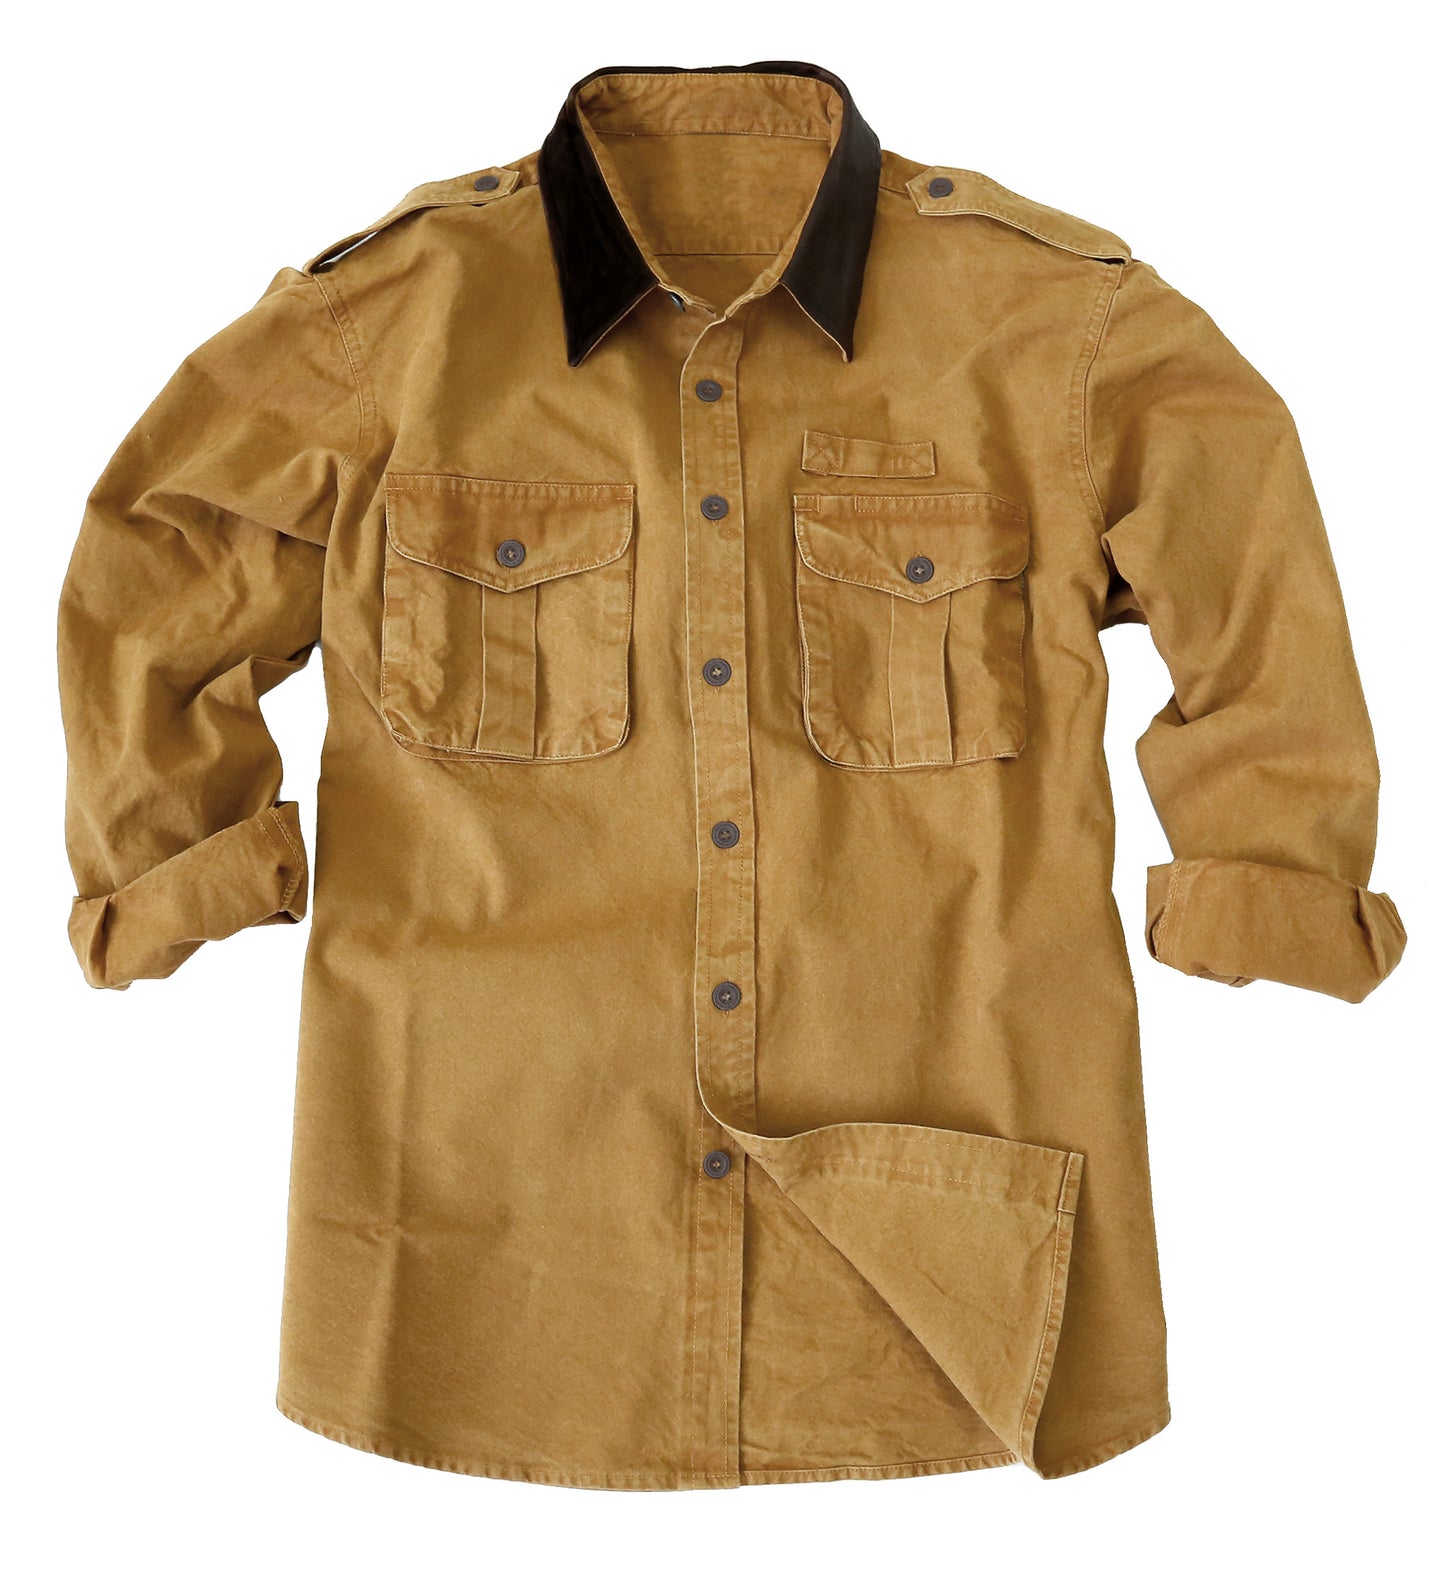 Robusted outdoor men's shirt with button placket and leather collar in Tobacco